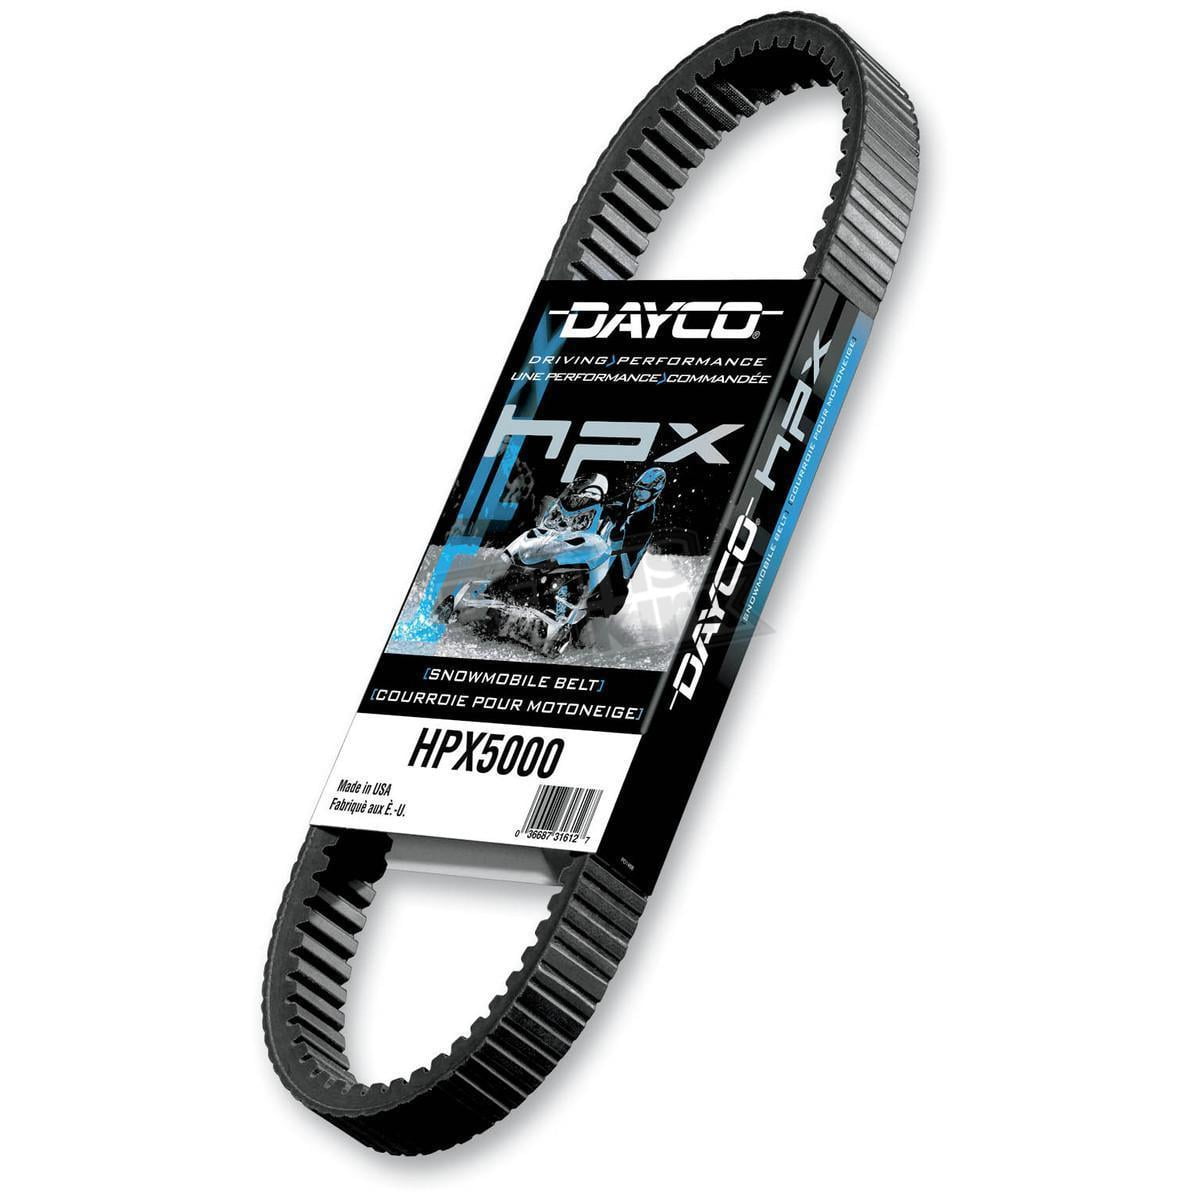 1.41" X 47.75" Dayco HPX5017 High Performance Extreme Drive Belt